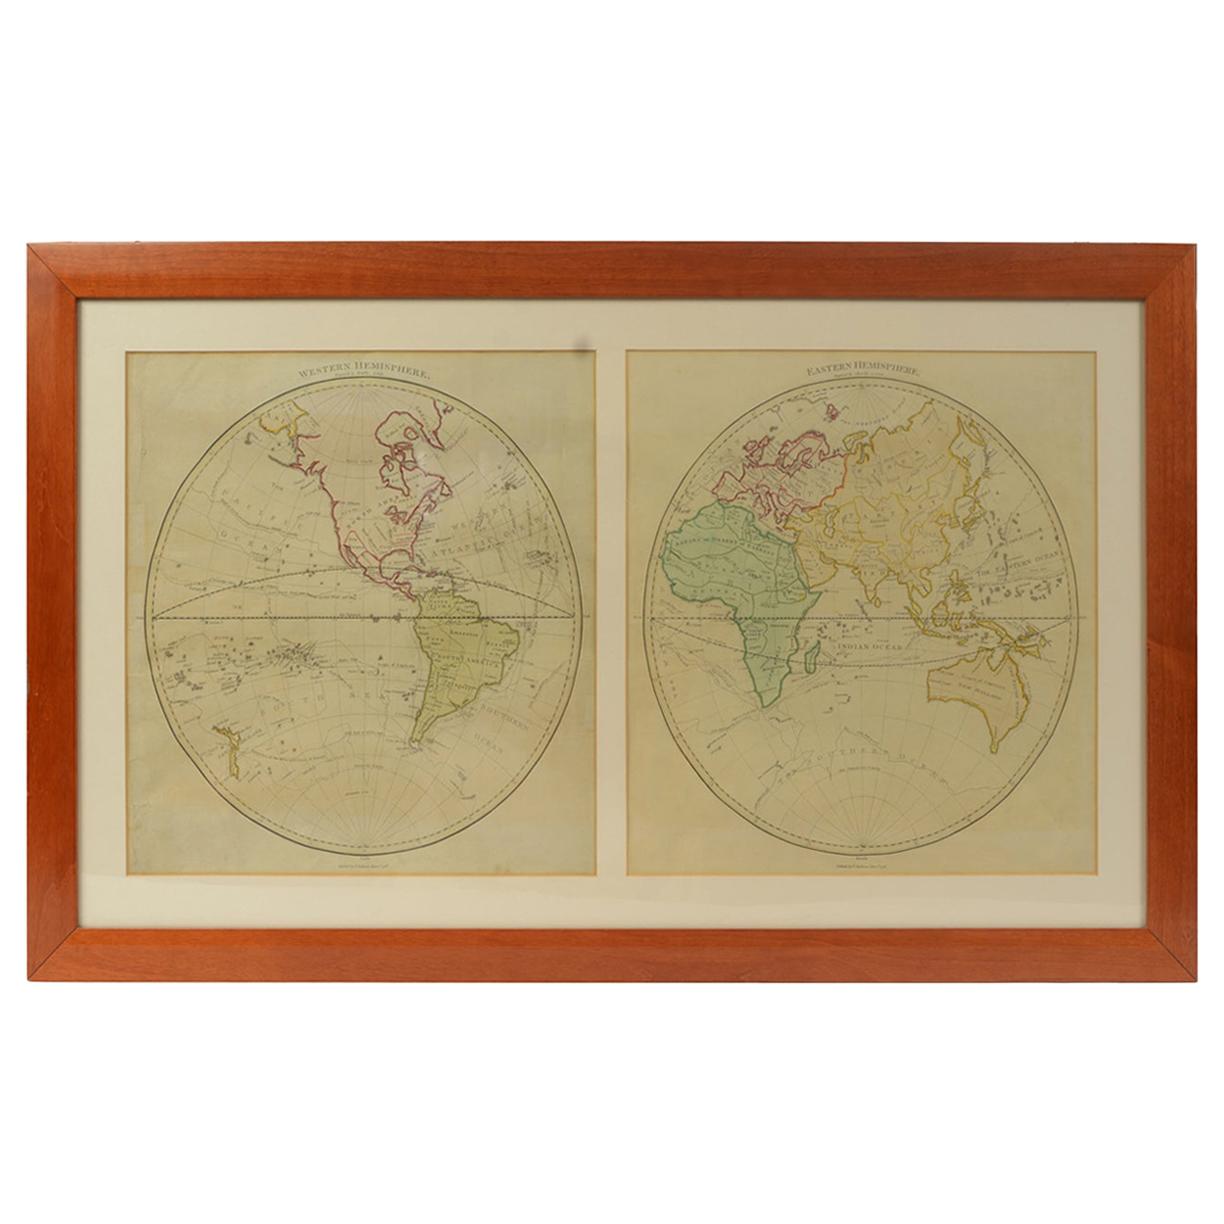 World Map Published in June 1783 by Stackhouse and Engraved by S.J. Neele London